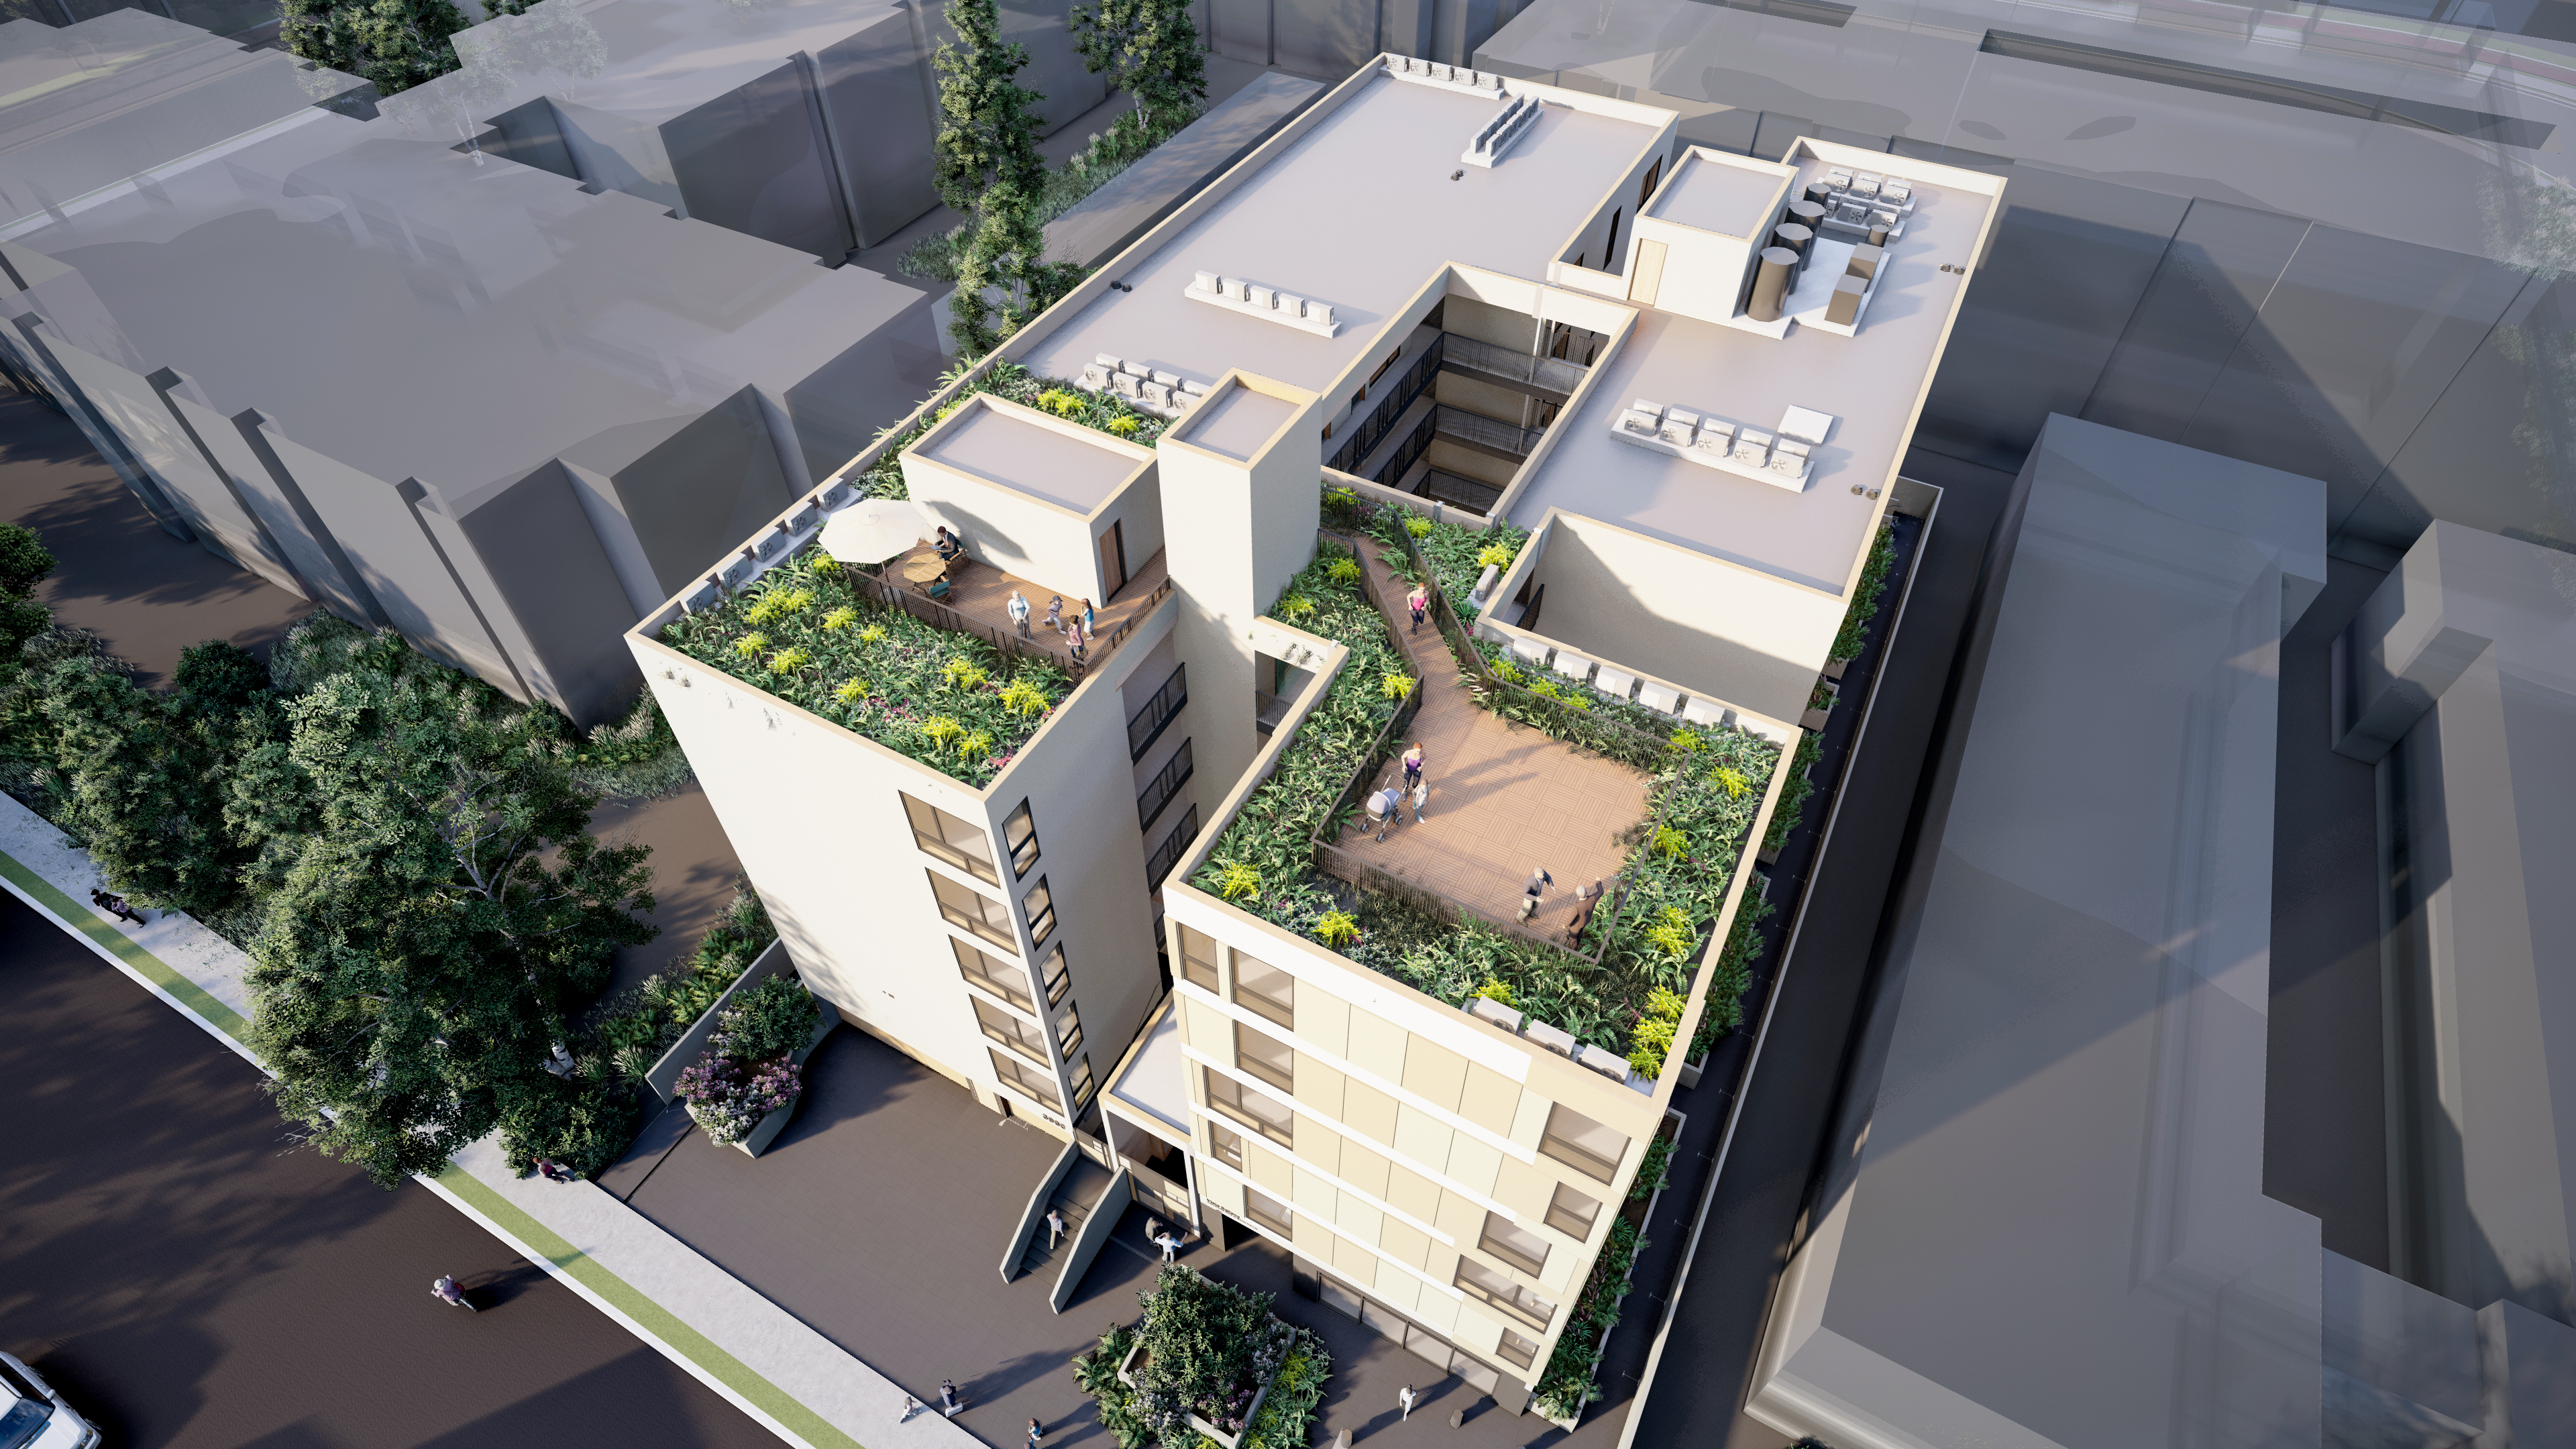 Rendering of property from aerial, perspective view. Rendering shows two rooftop patio areas.